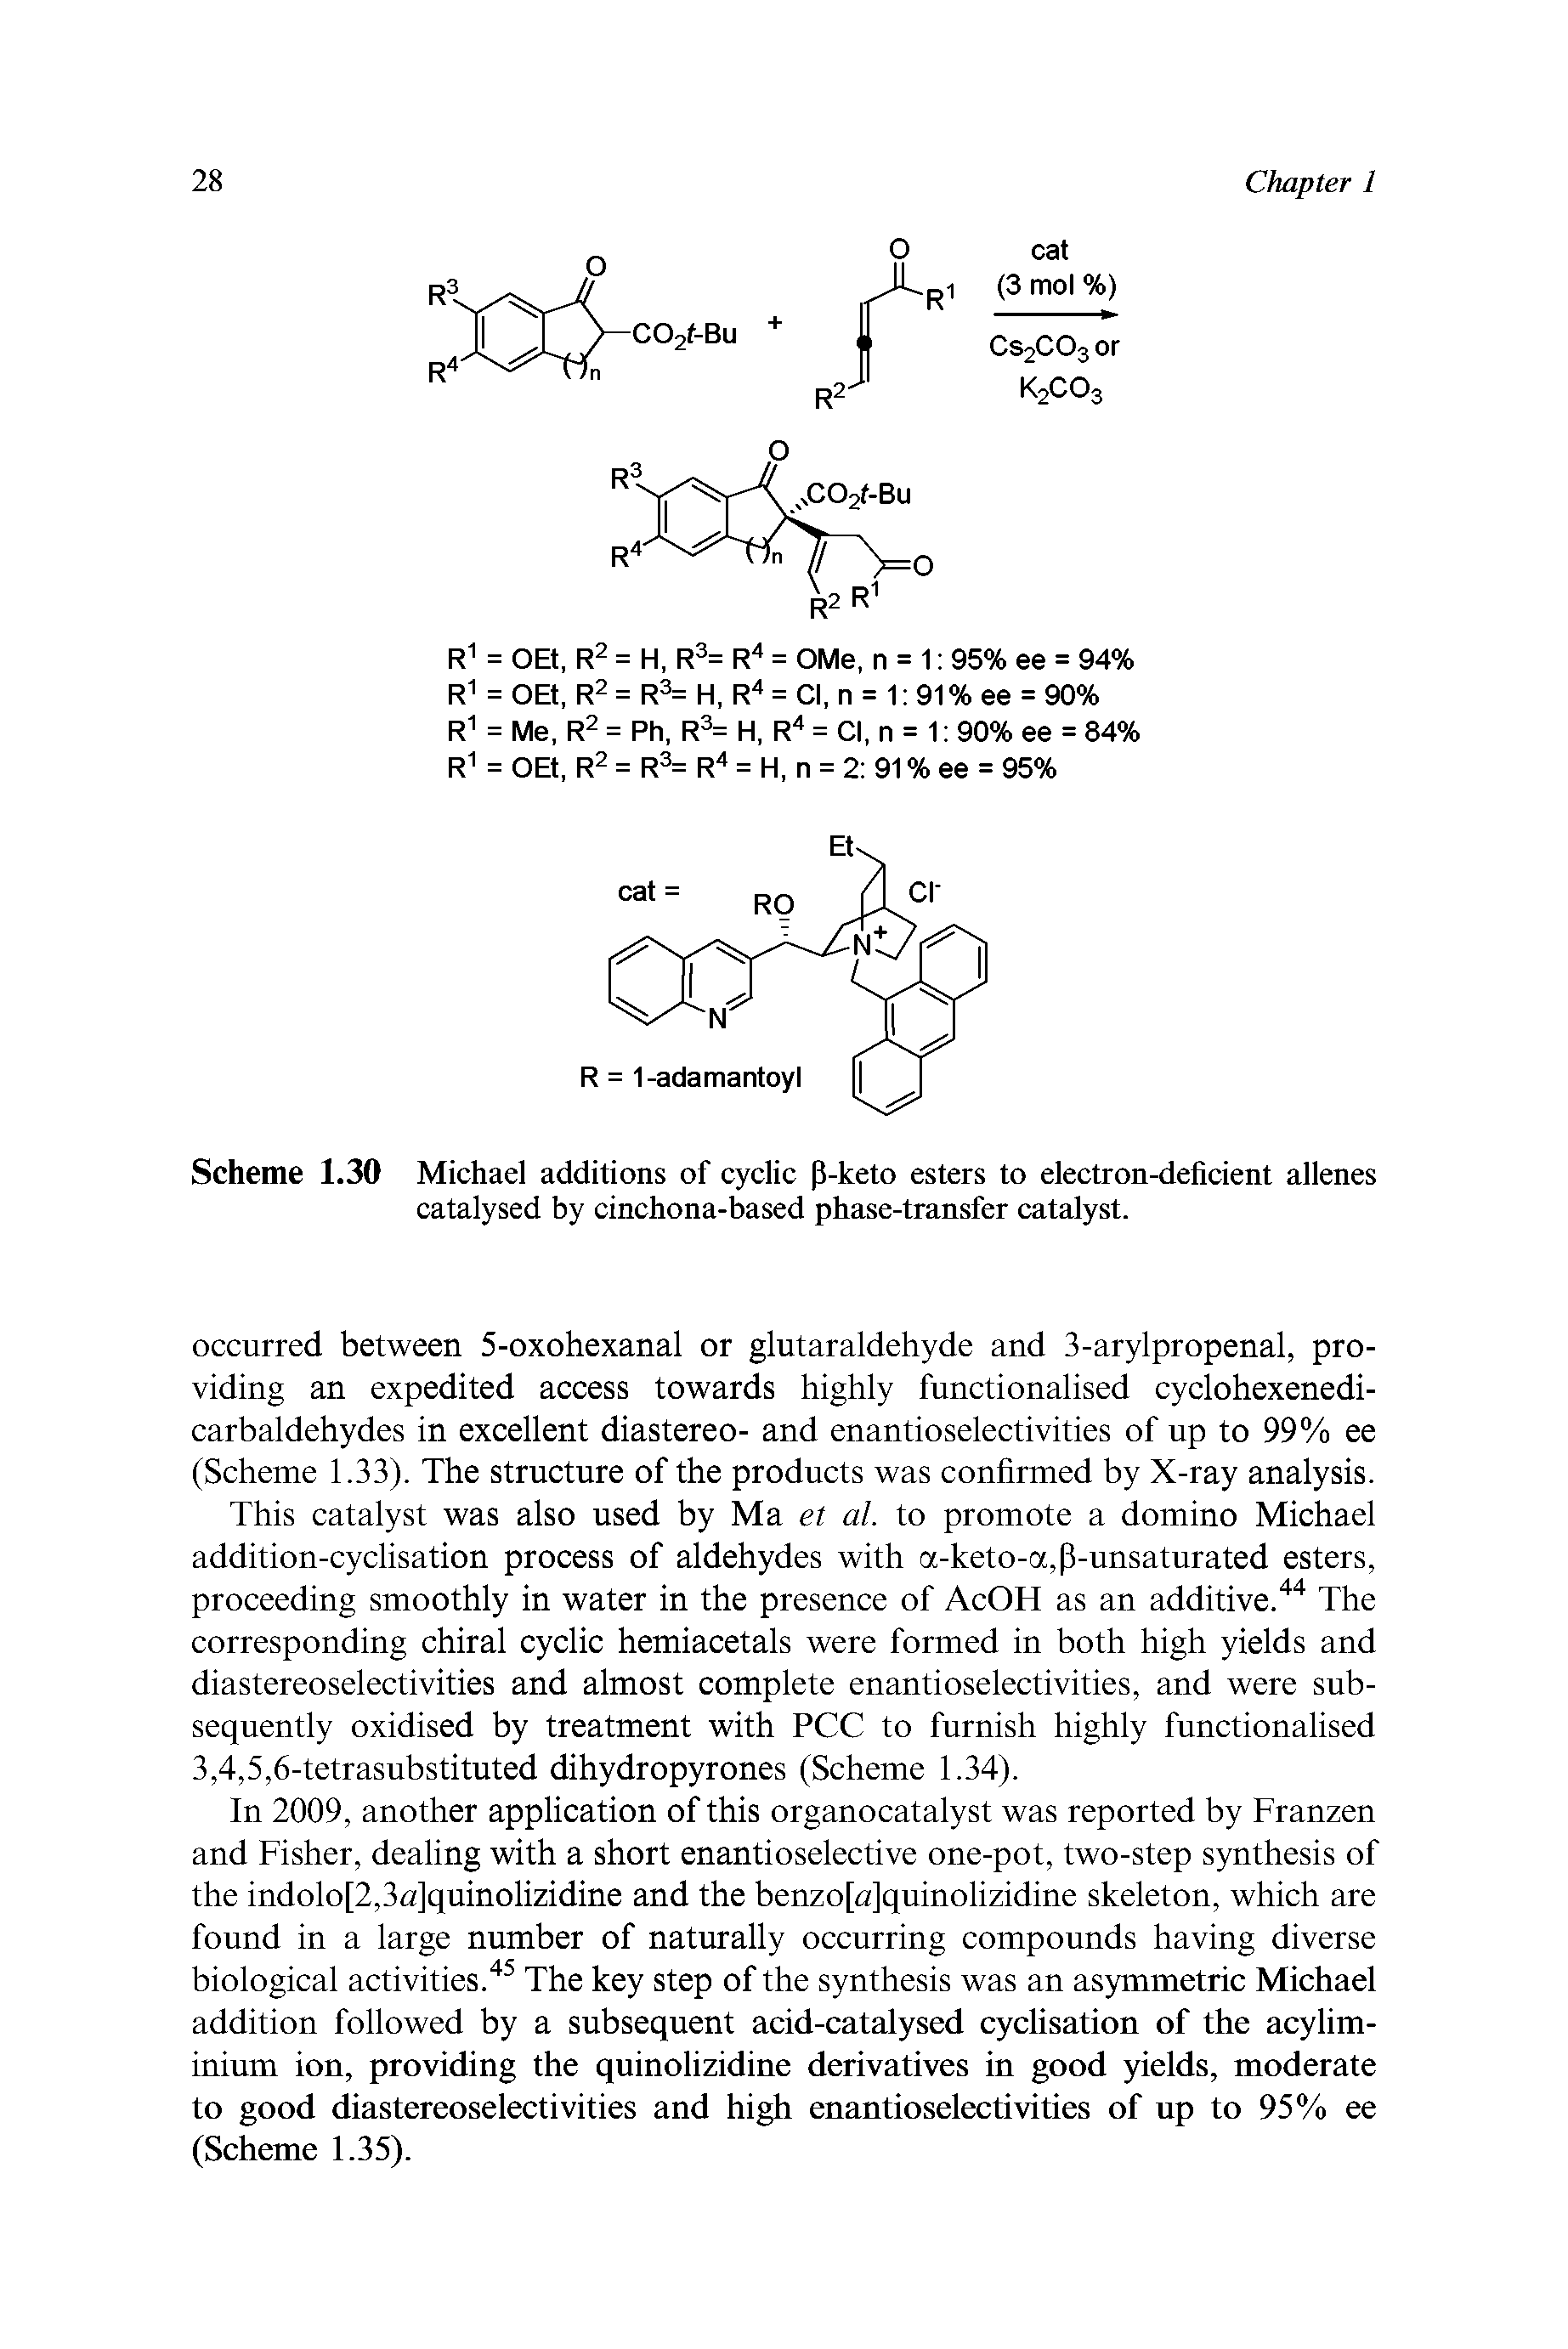 Scheme 1.30 Michael additions of cyclic P-keto esters to electron-deficient allenes catalysed by cinchona-based phase-transfer catalyst.